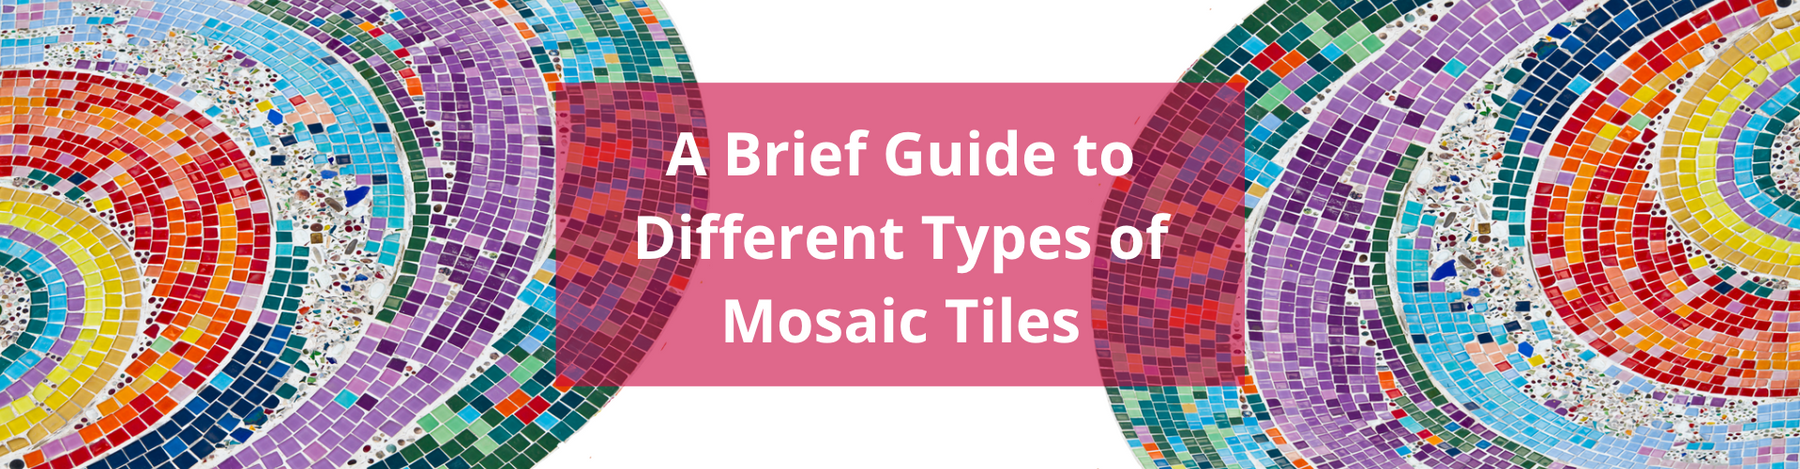 A Brief Guide to Different Types of Mosaic Tiles: How to Choose the Right Ones for Your Project